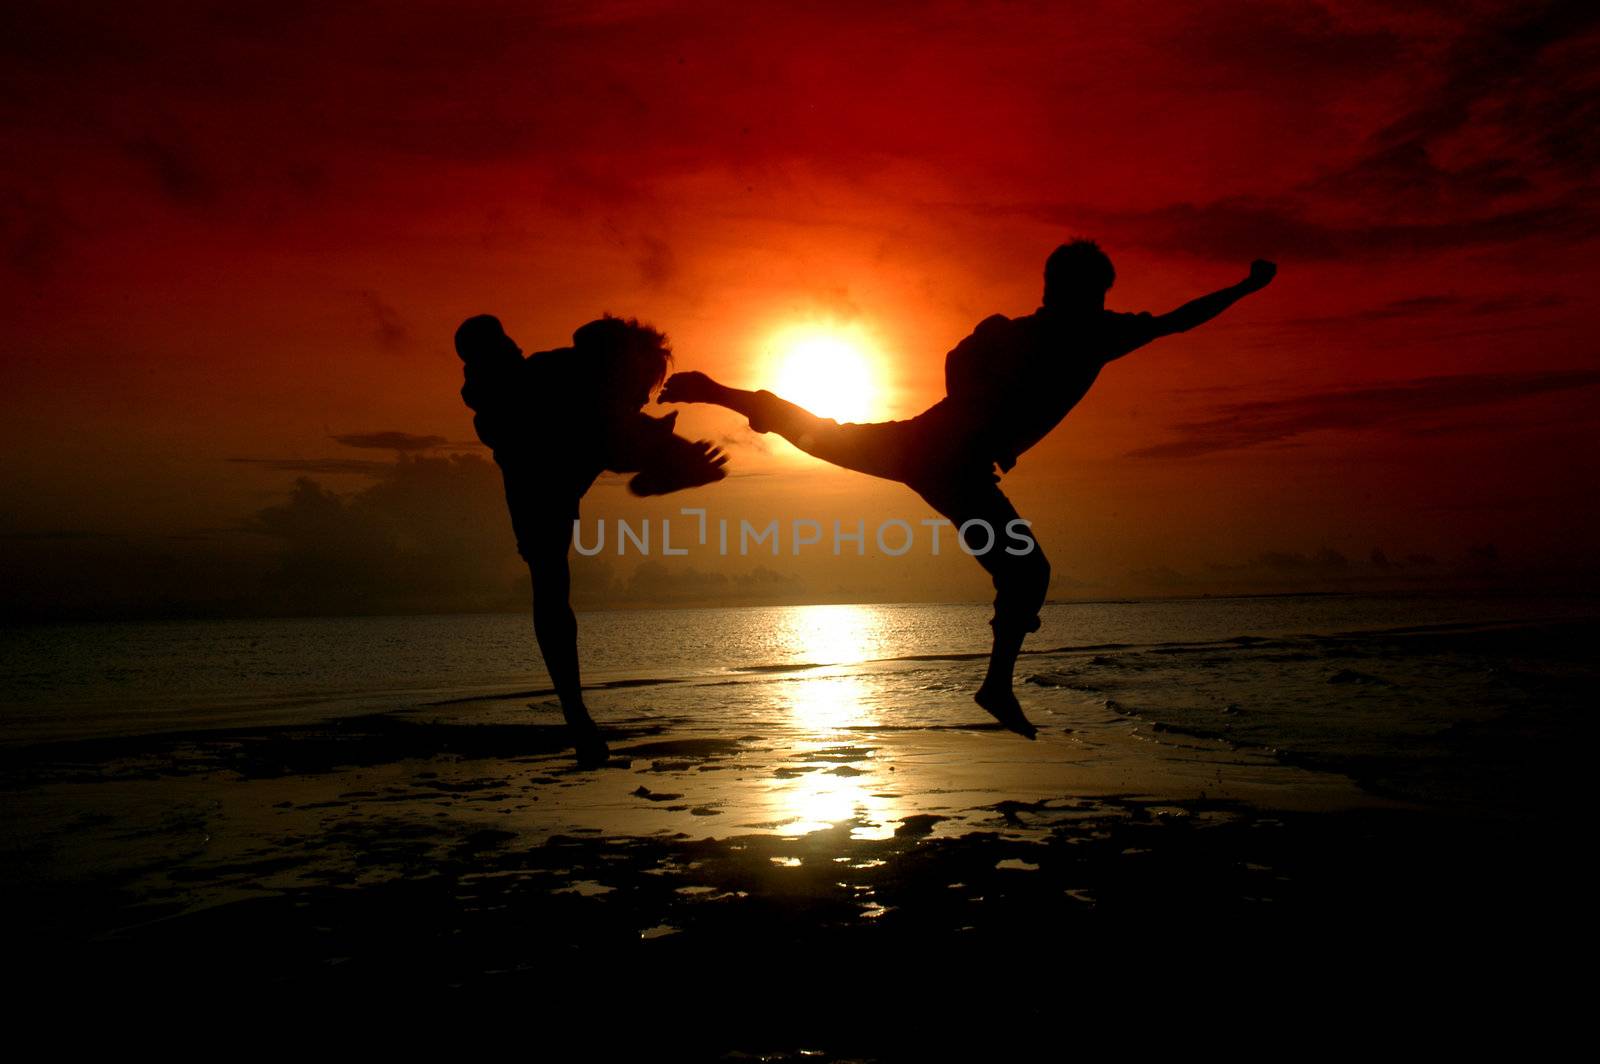 silhouette of two people fighting by antonihalim